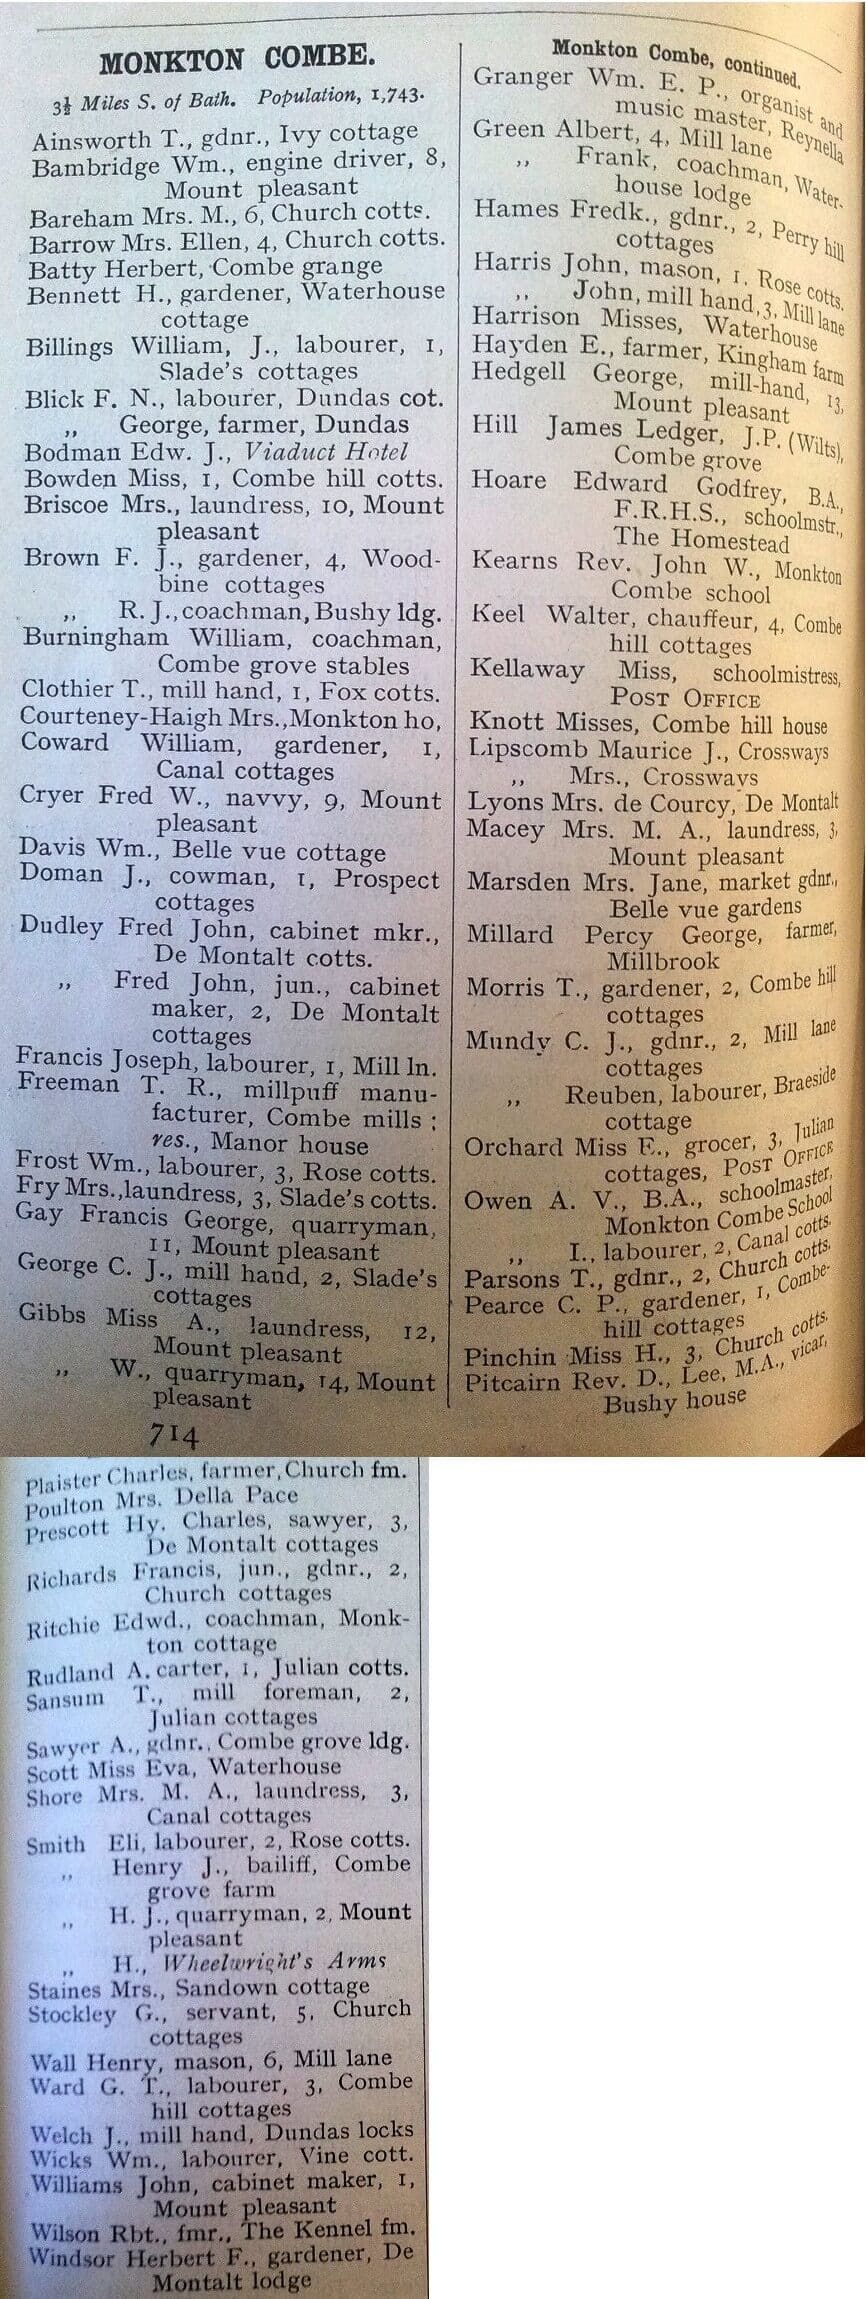 1910 Post Office Directory for Monkton Combe